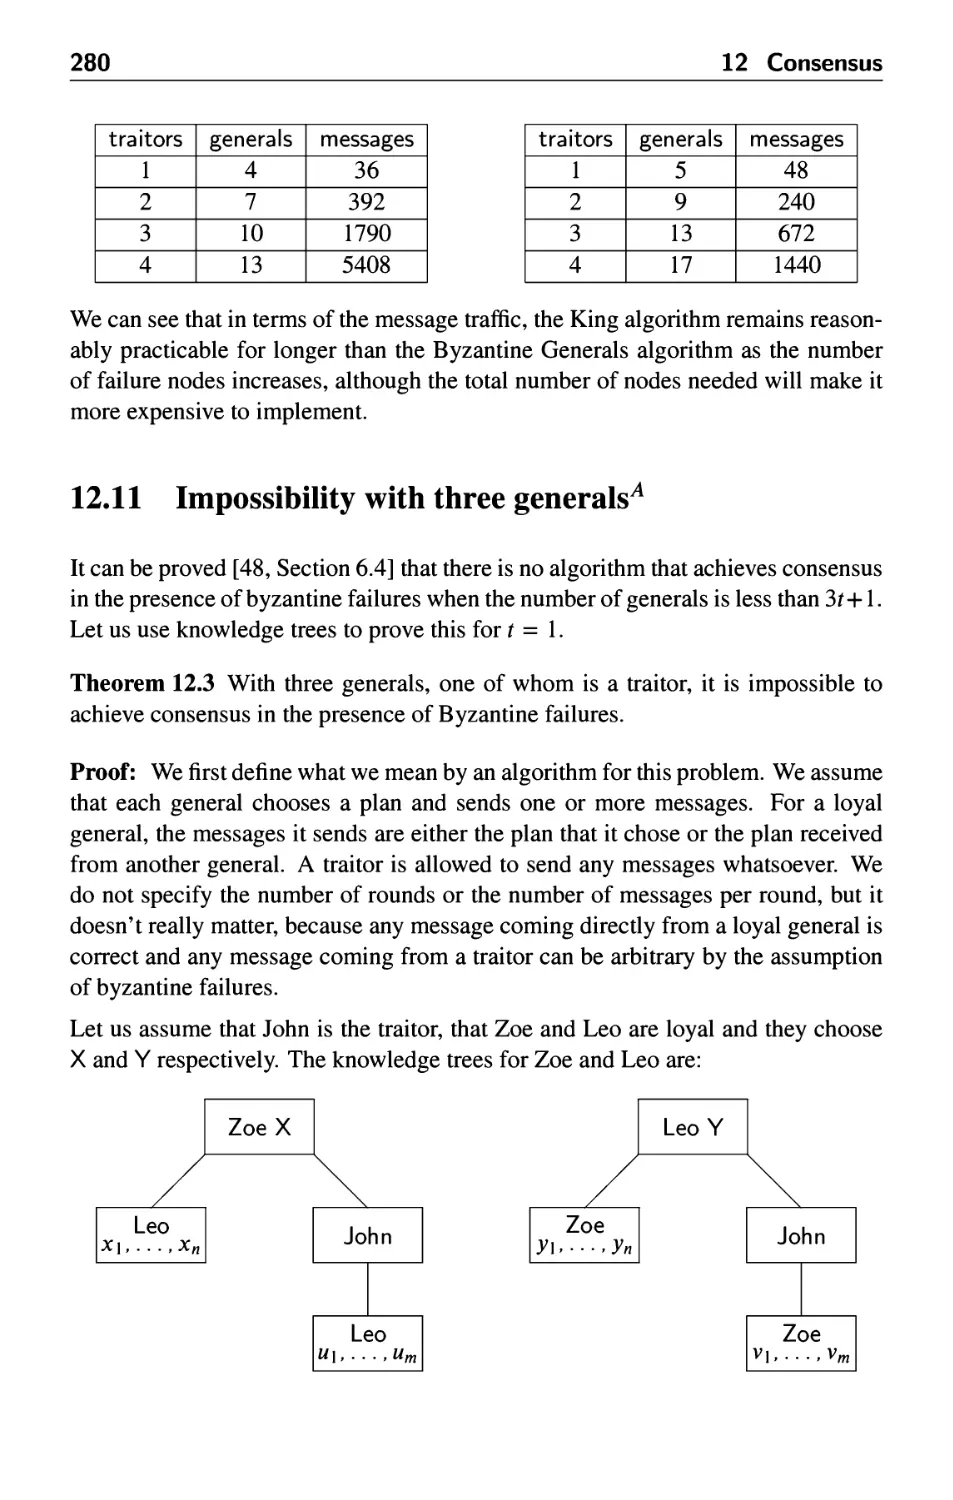 12.11 Impossibility with three generals